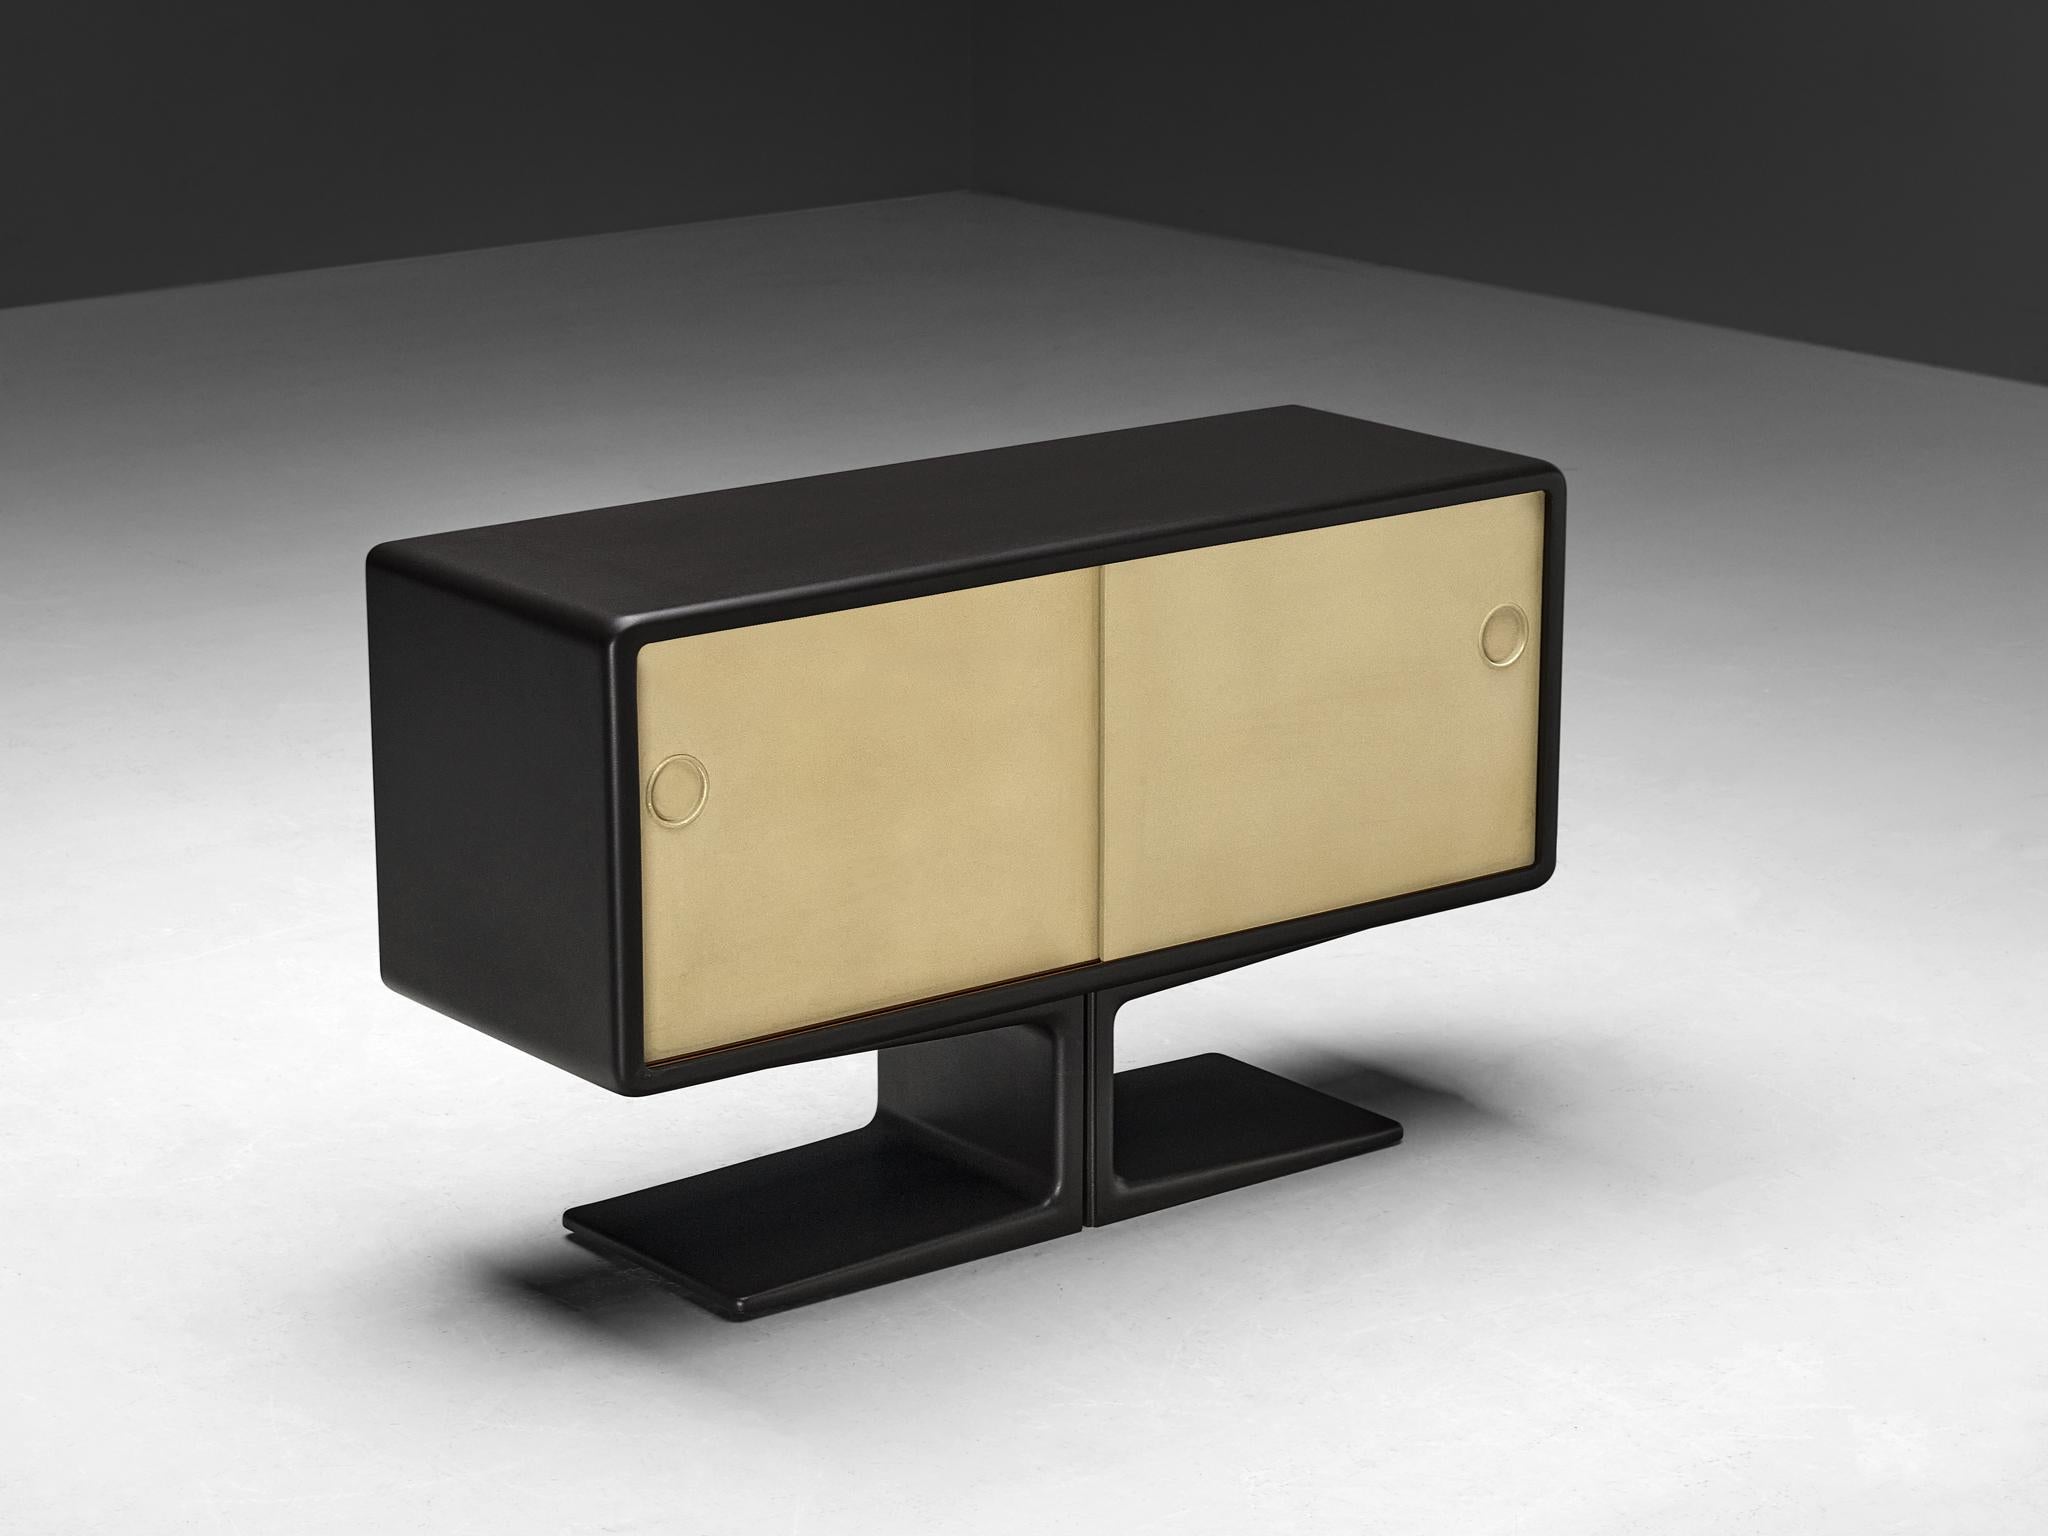 Ernest Igl for Wilhelm Werndl, cabinet, fiberglass, lacquered wood, Germany, 1970s

Stylish cabinet with two sliding doors crafted by German designer Ernest Igl. This design captures the spirit of the seventies, an era characterized by vividness and